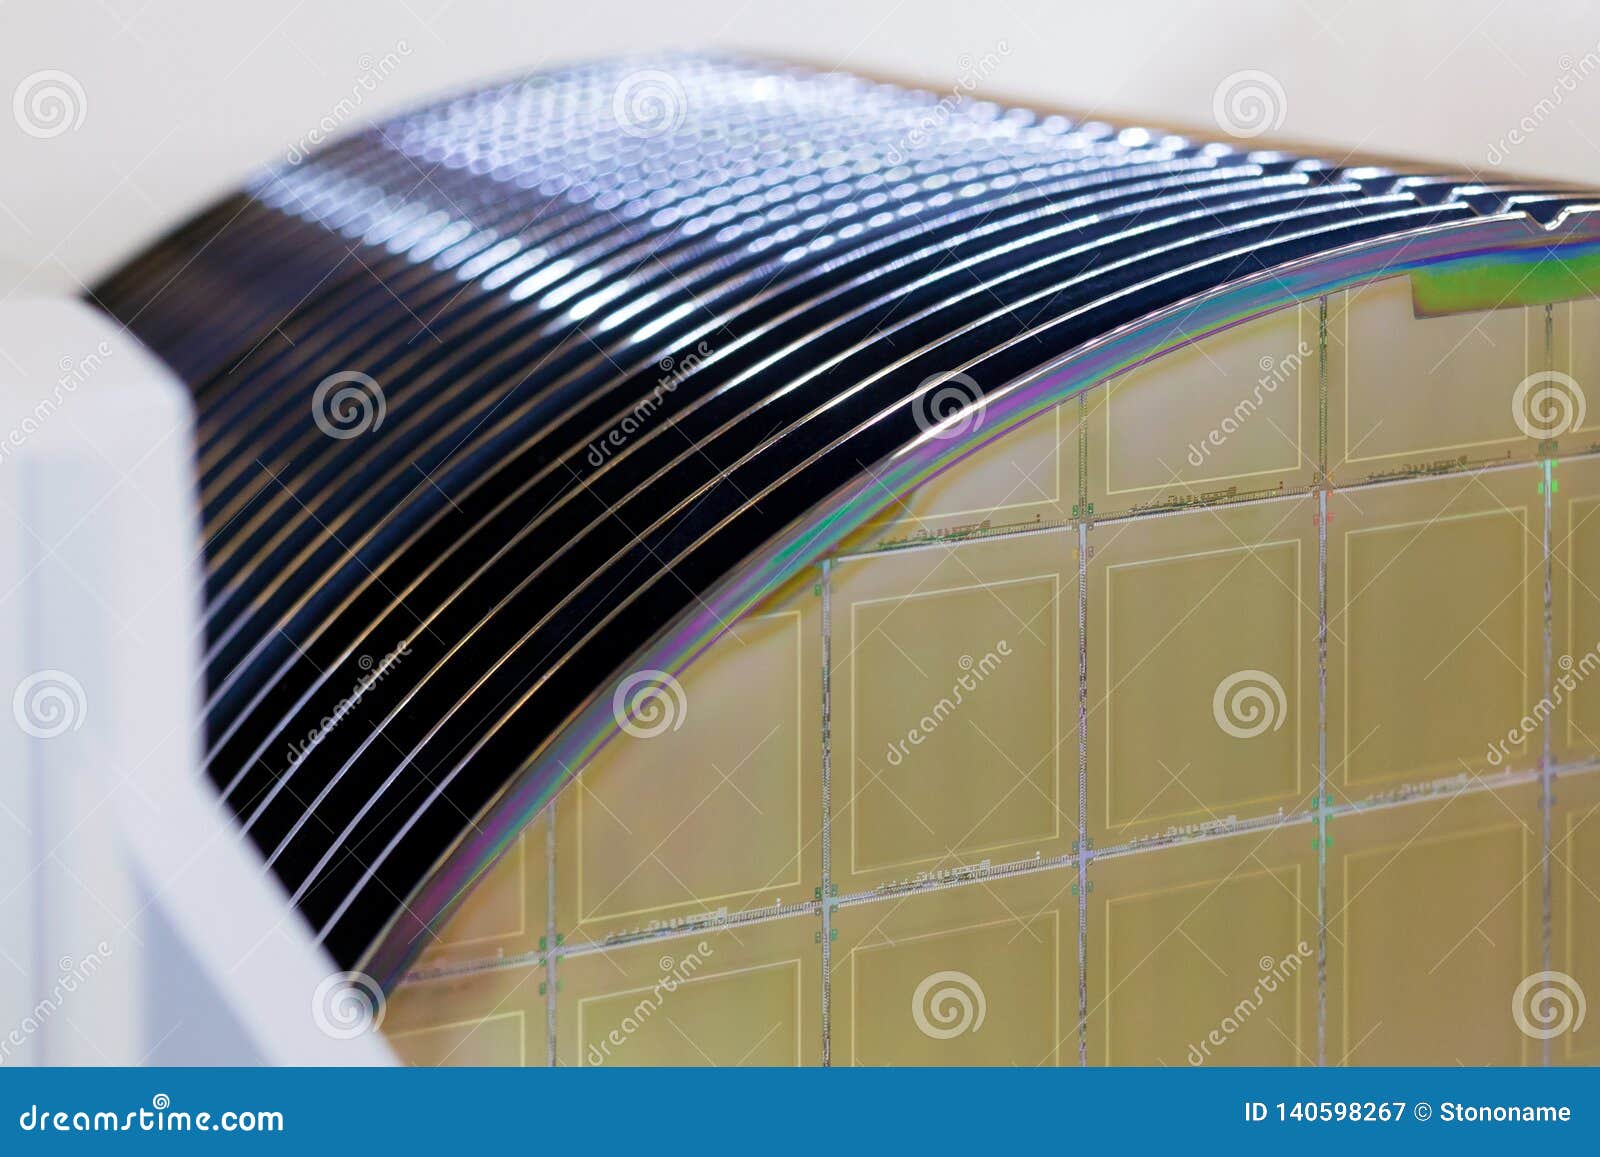 silicon wafers in white plastic holder box on a table- a wafer is a thin slice of semiconductor material, such as a crystalline